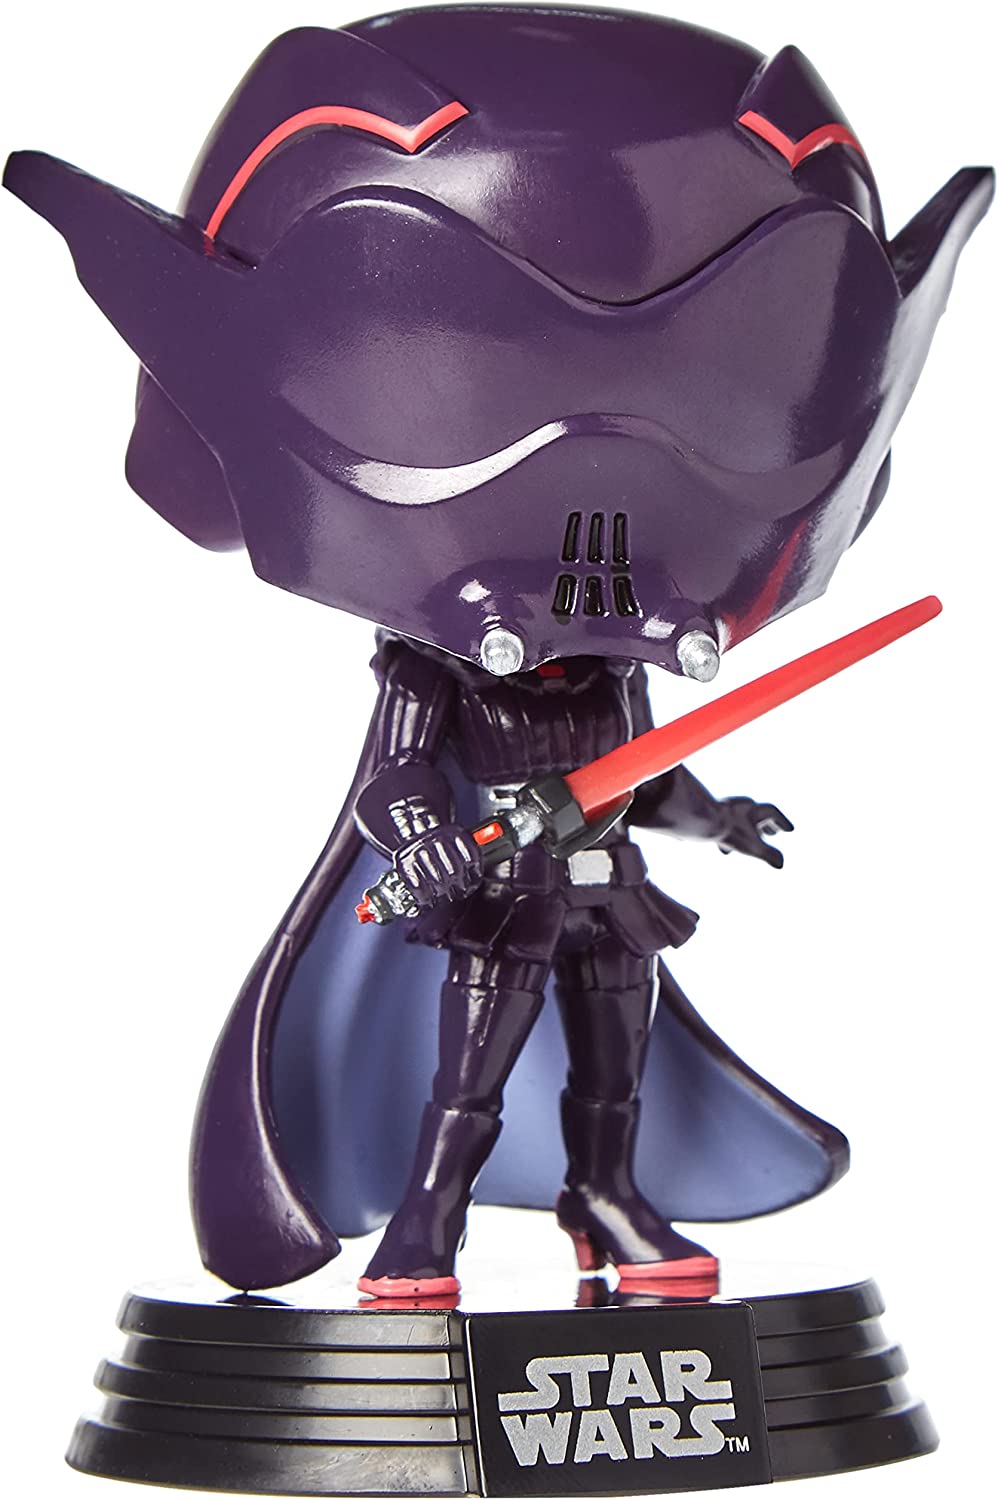 Product Image of Funko Pop! Star Wars: Visions Am Pop! Vinyl Figure - Exclusive with Pop! Protector